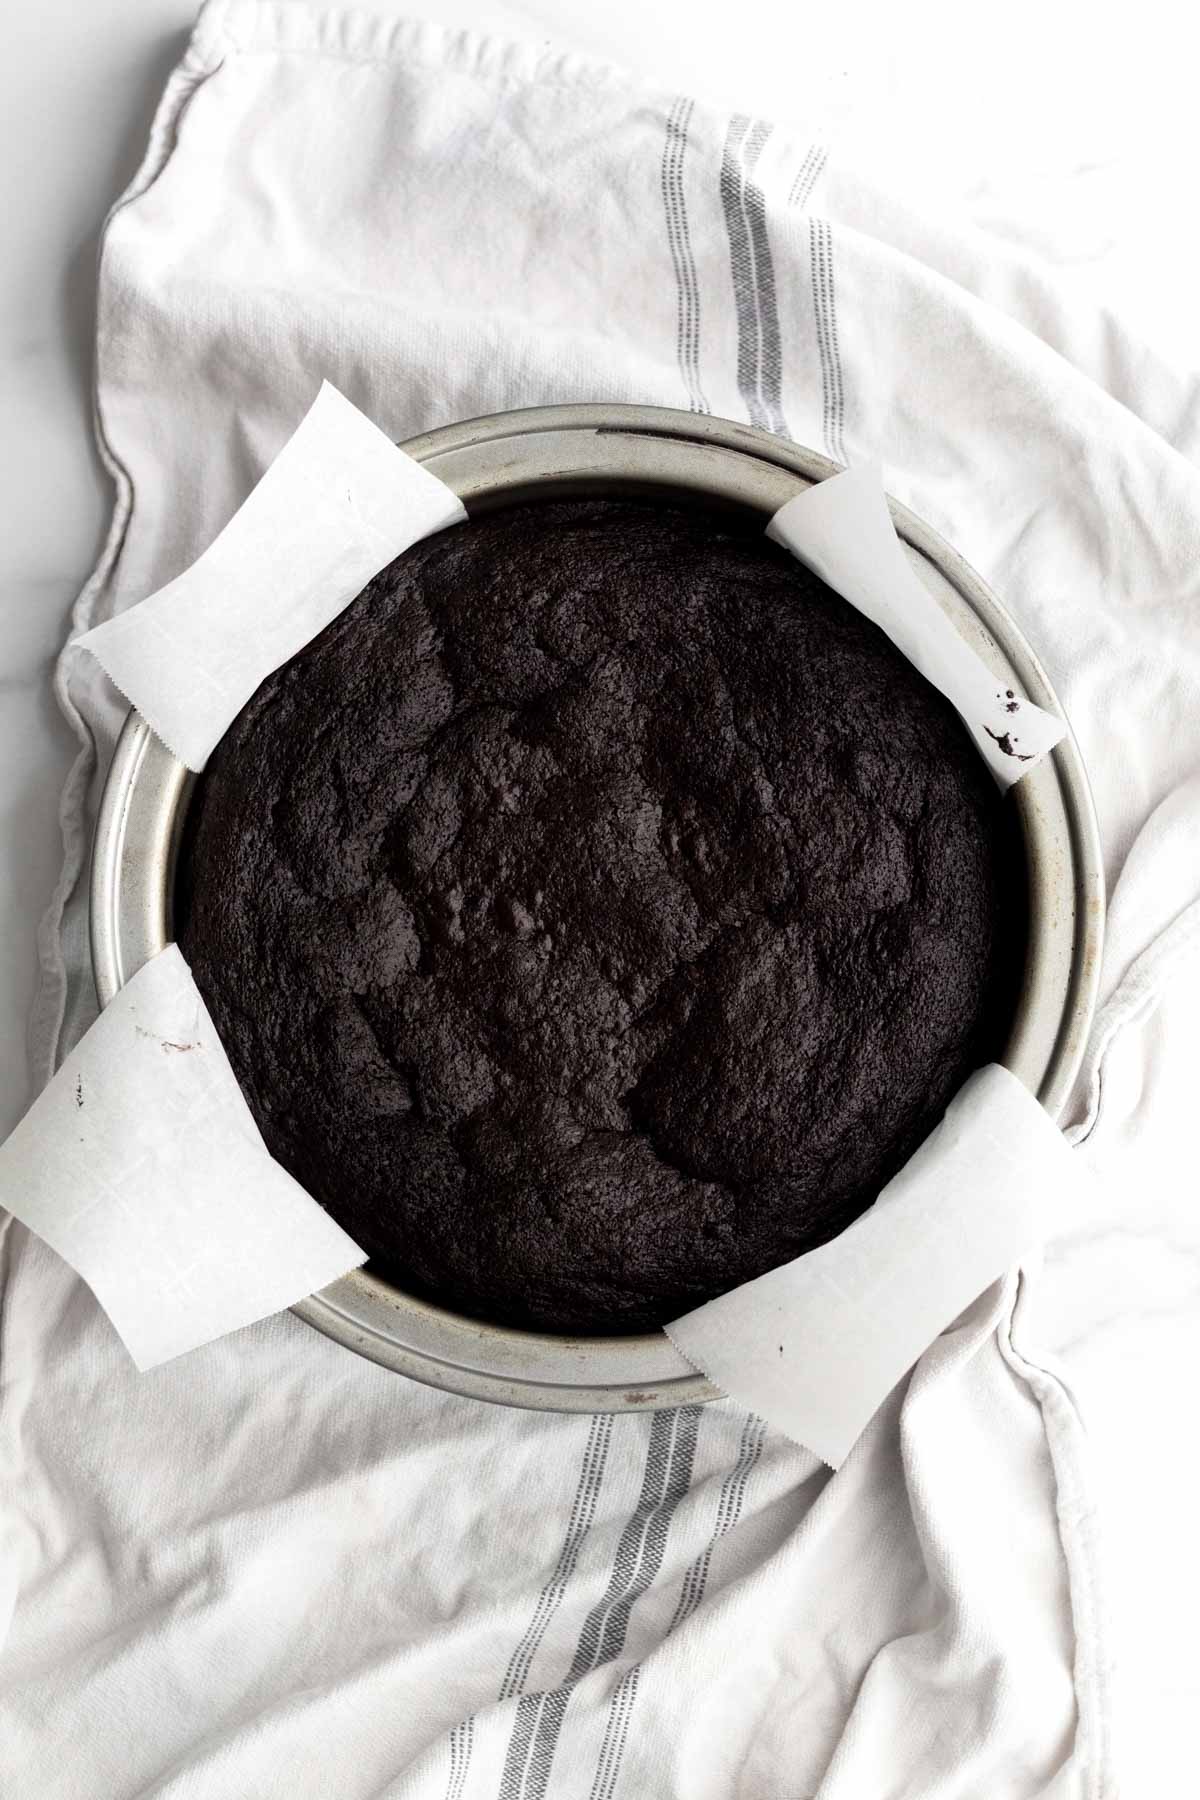 Fresh oven baked chocolate cake in the cake pan.